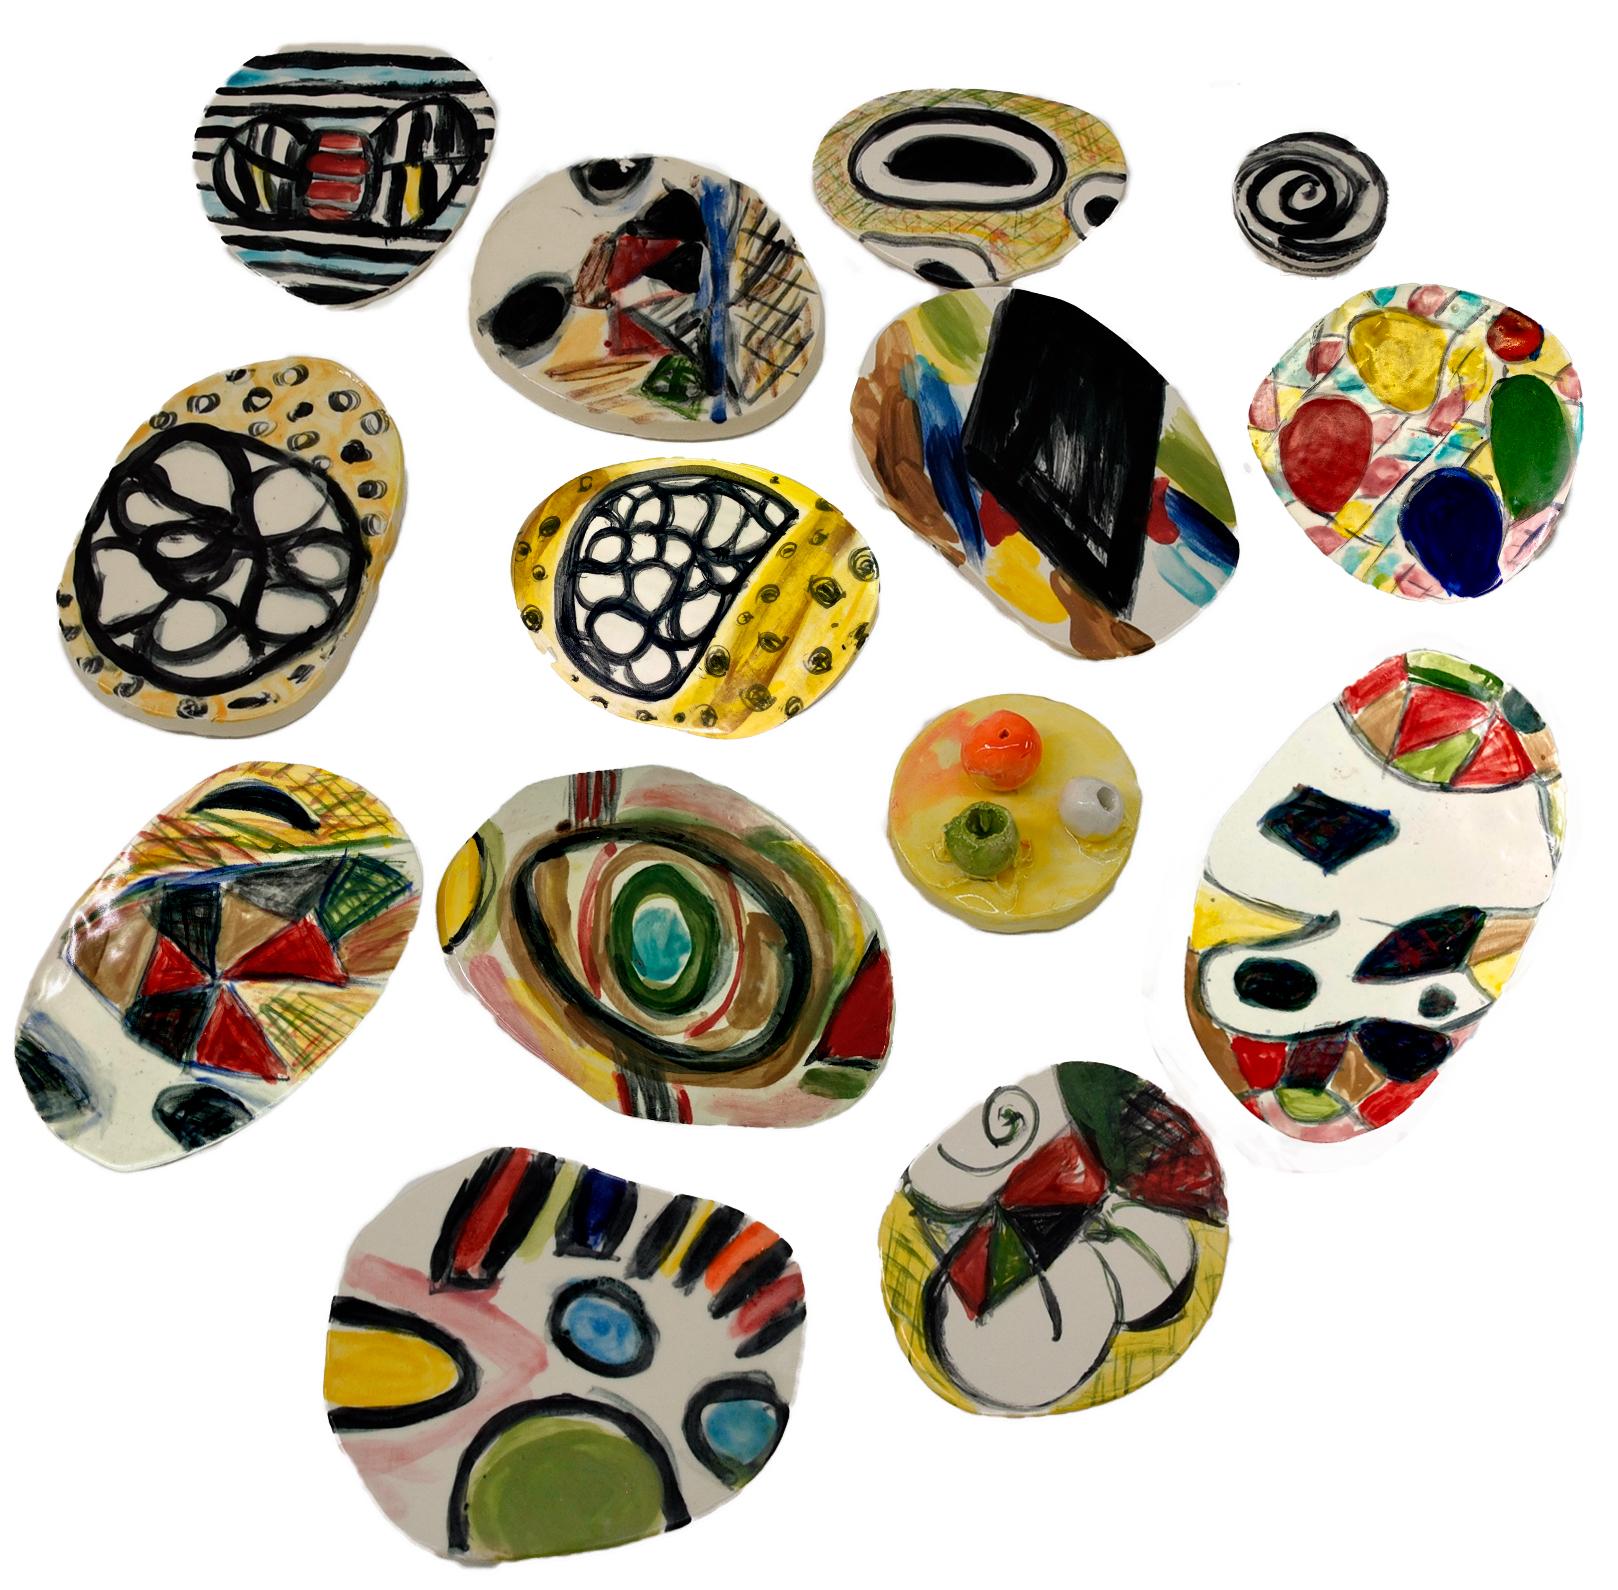 Charo Oquet Still-Life Sculpture - Wall abstract sculpture Untitled XXIV. Set of 14 Glazed Ceramic Discs